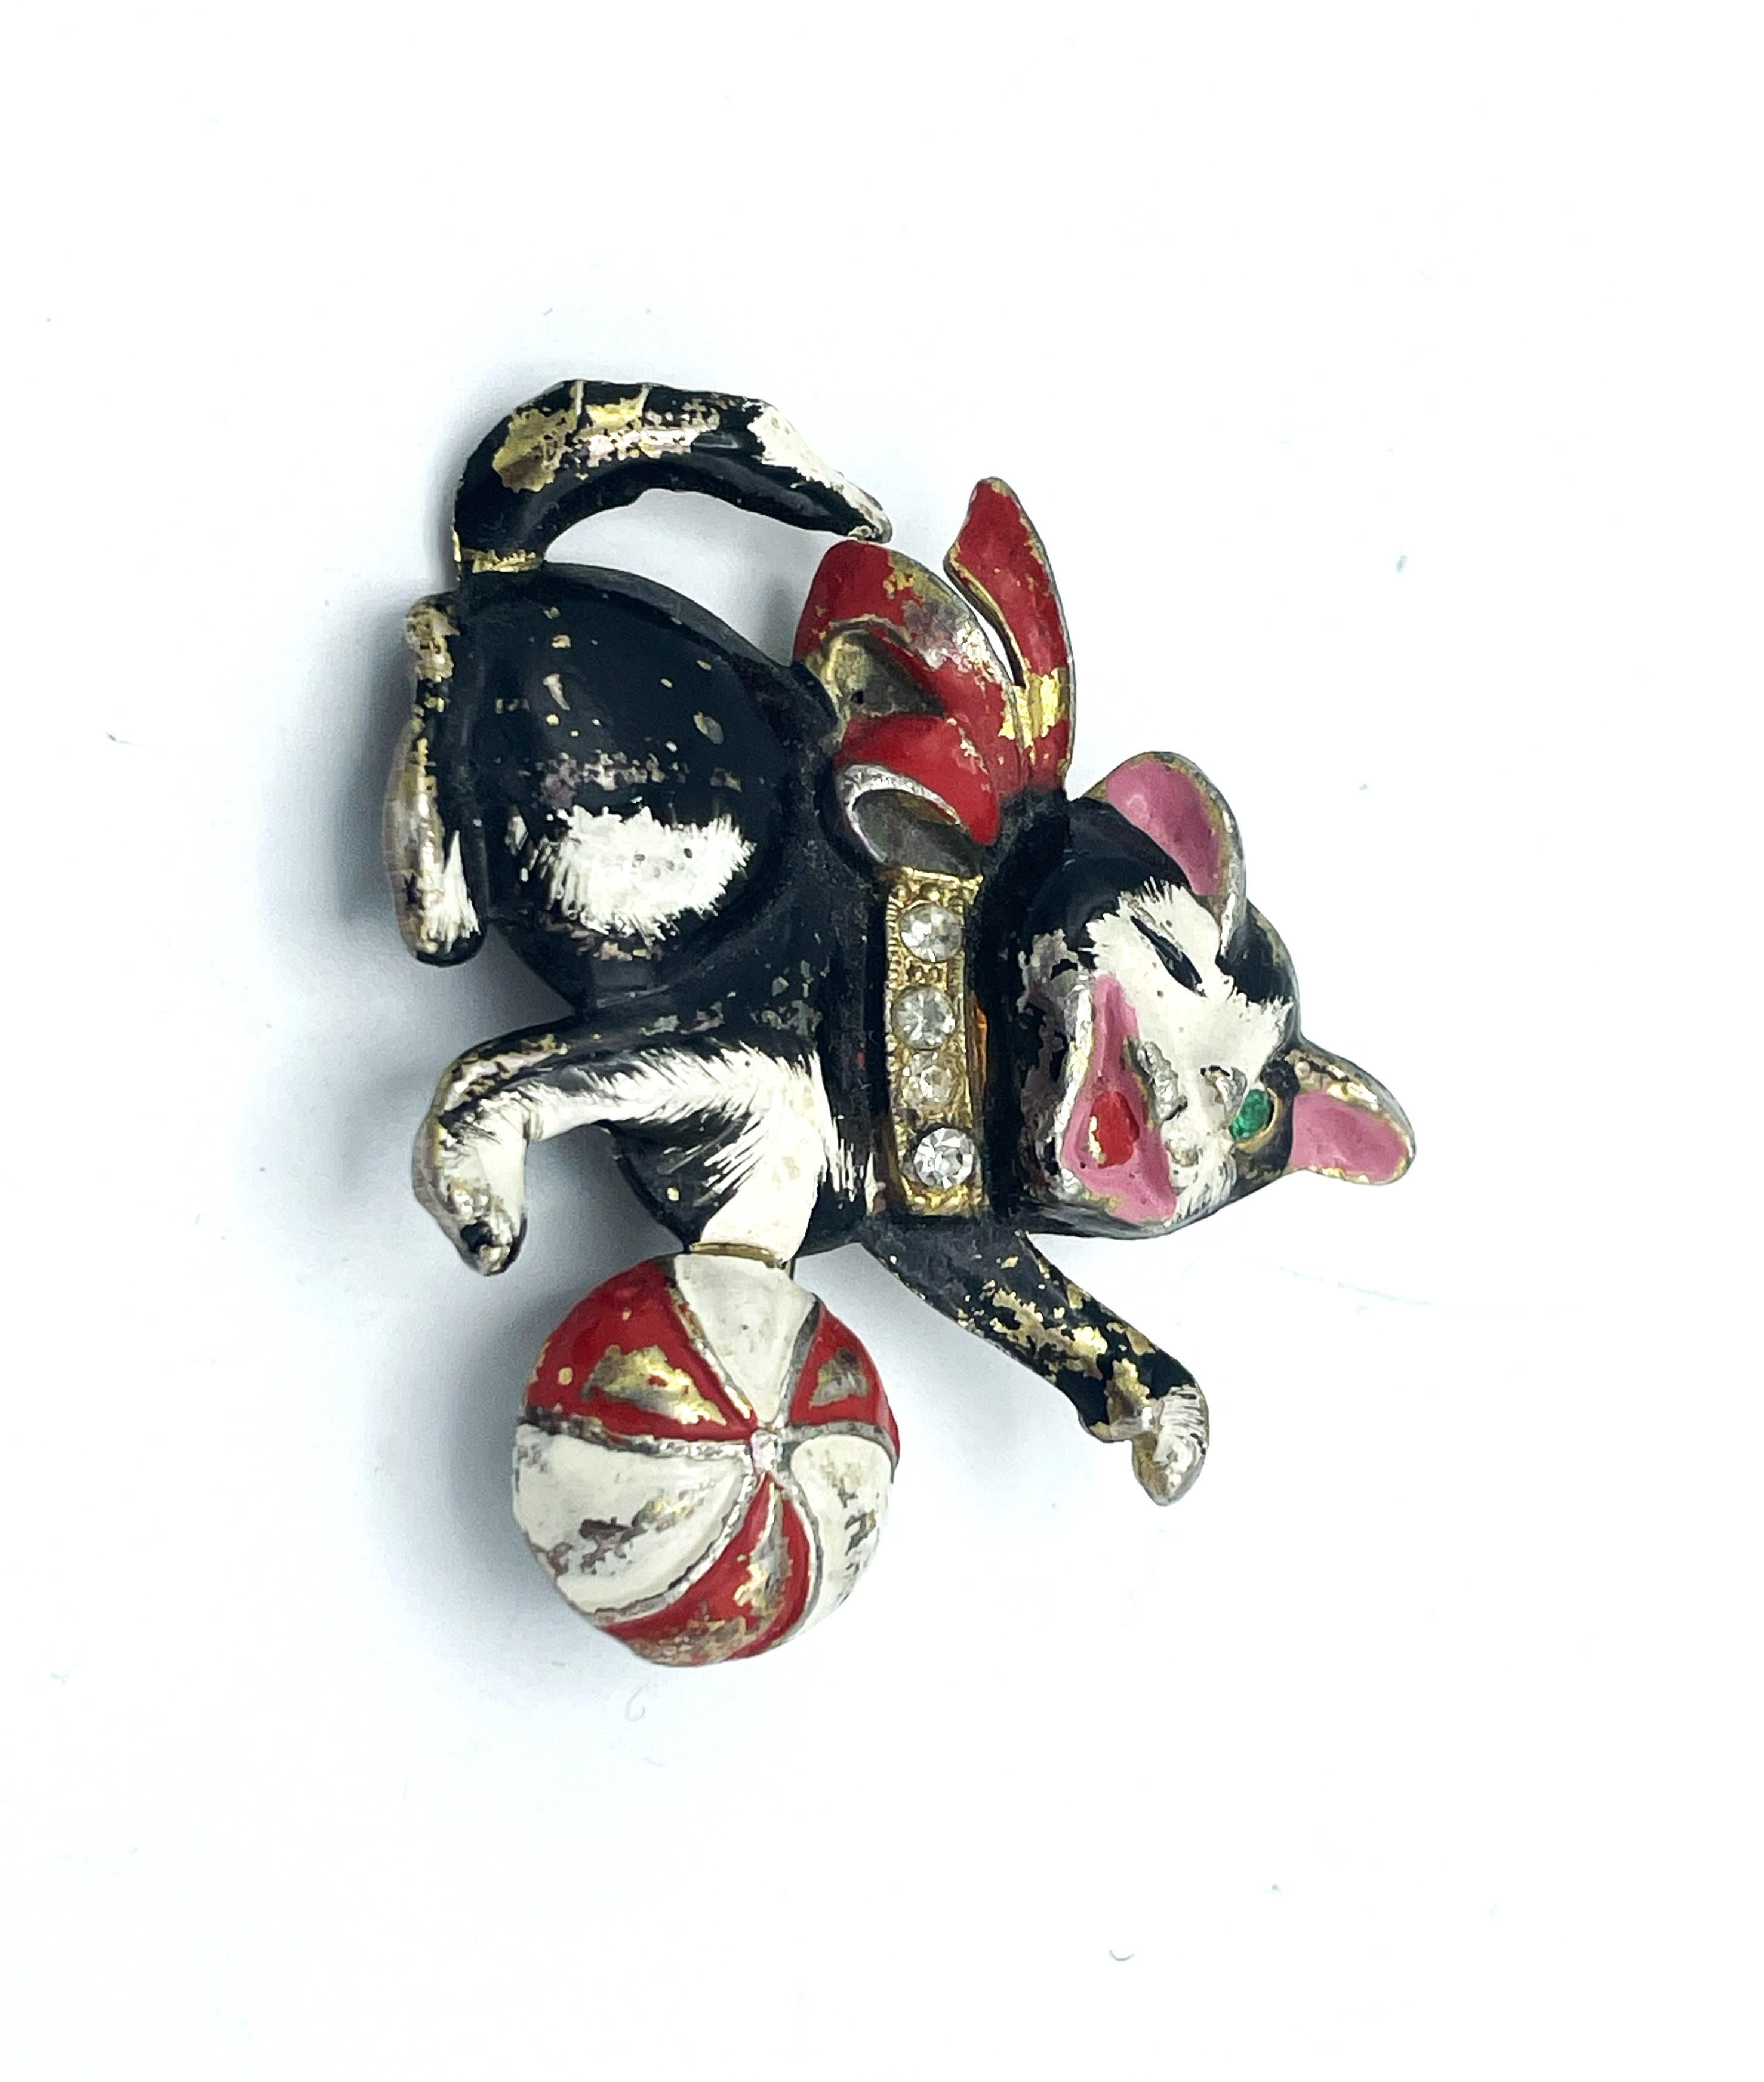 Women's or Men's  A laughing one and playing cat brooch with rhinestone collar, enameled, 1930/40